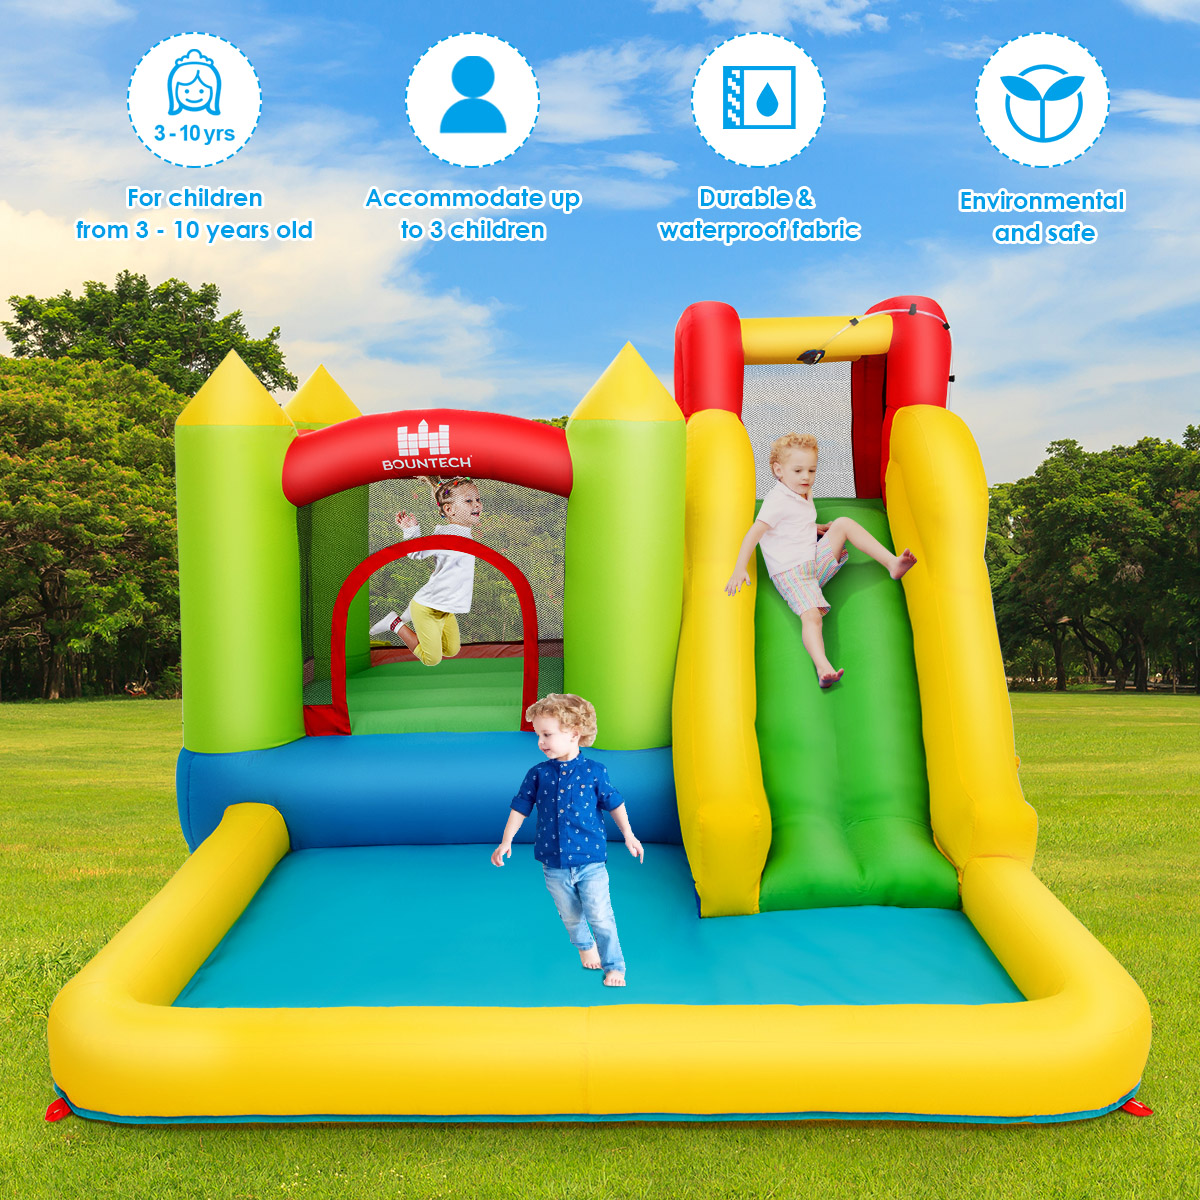 Costway Inflatable Bounce House Water Slide Jump Bouncer Climbing Wall Splash Pool Blower Excluded - image 5 of 10